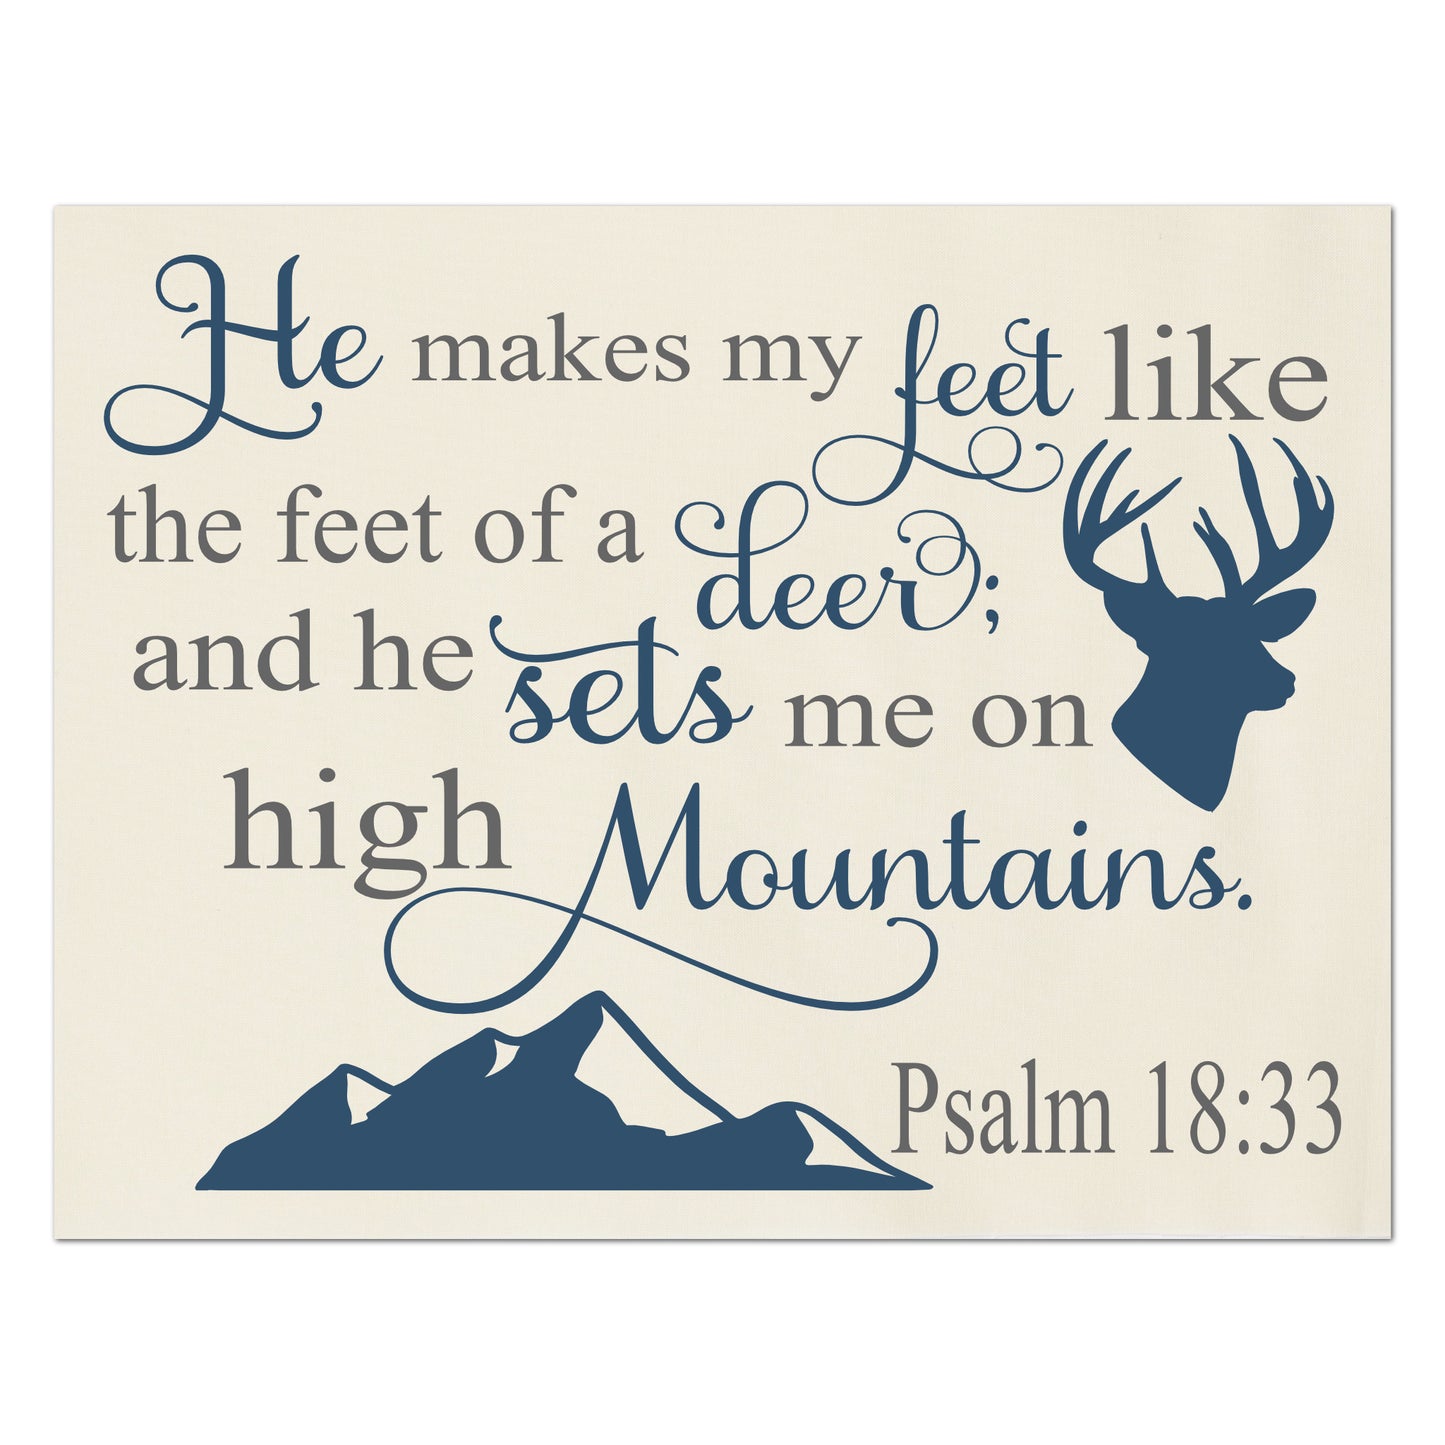 He makes my feet like the feet of a deer; and he sets me on high mountains - Psalm 18:33 - Christian Fabric Panel Print, Quilt Block, Scripture Fabric